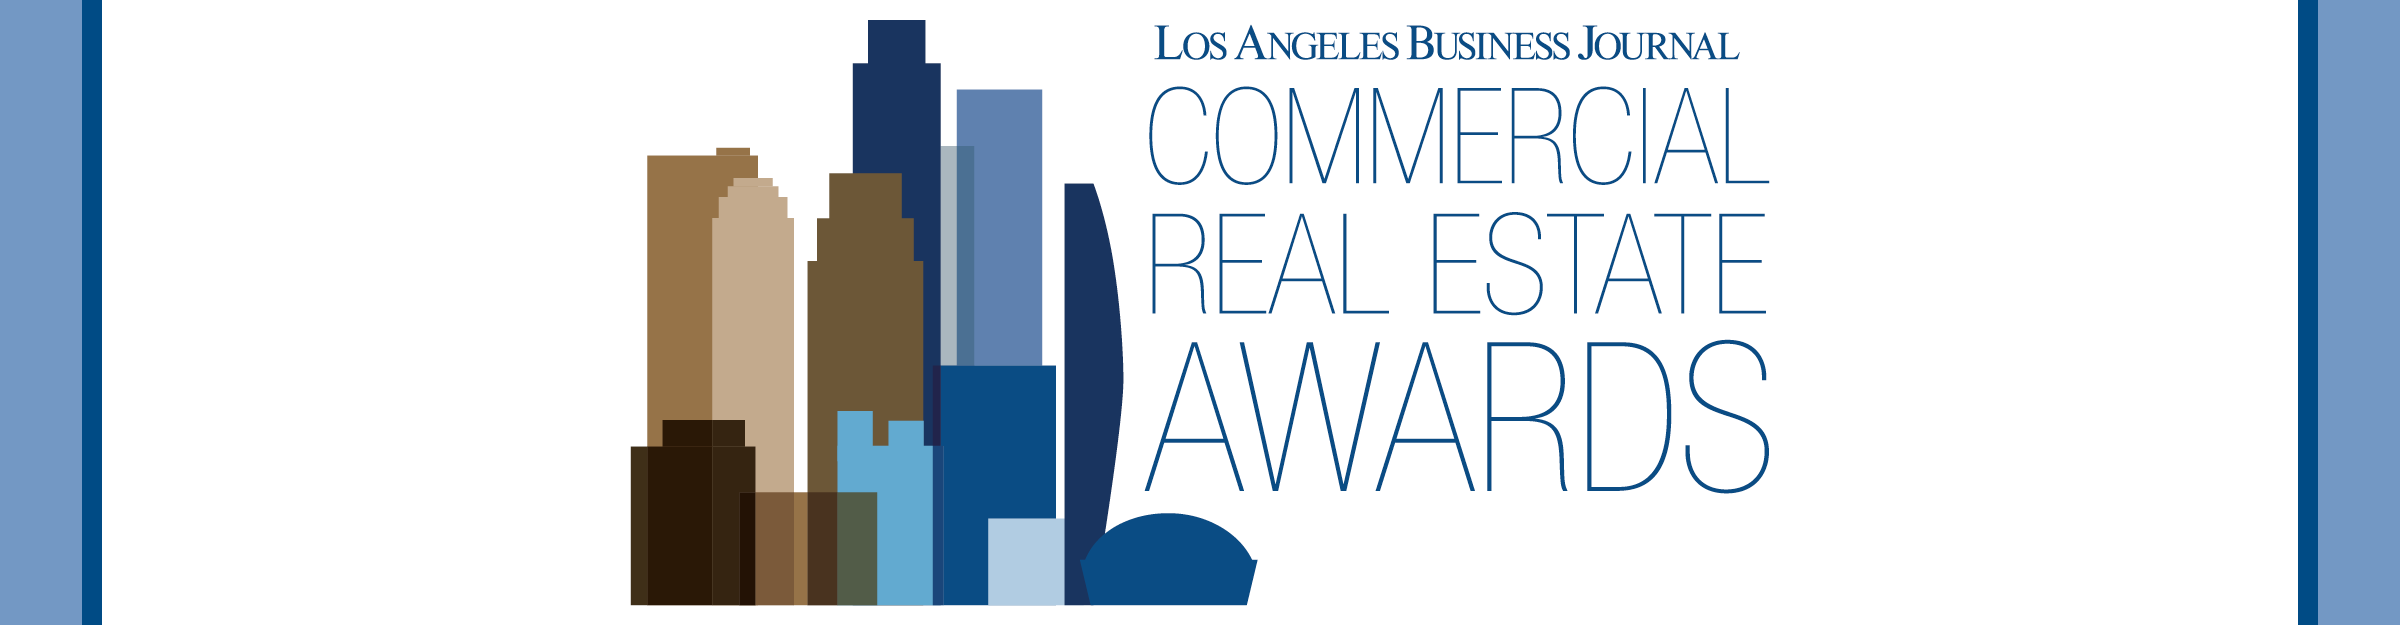 Los Angeles Business Journal Commercial Real Estate Awards Event Banner